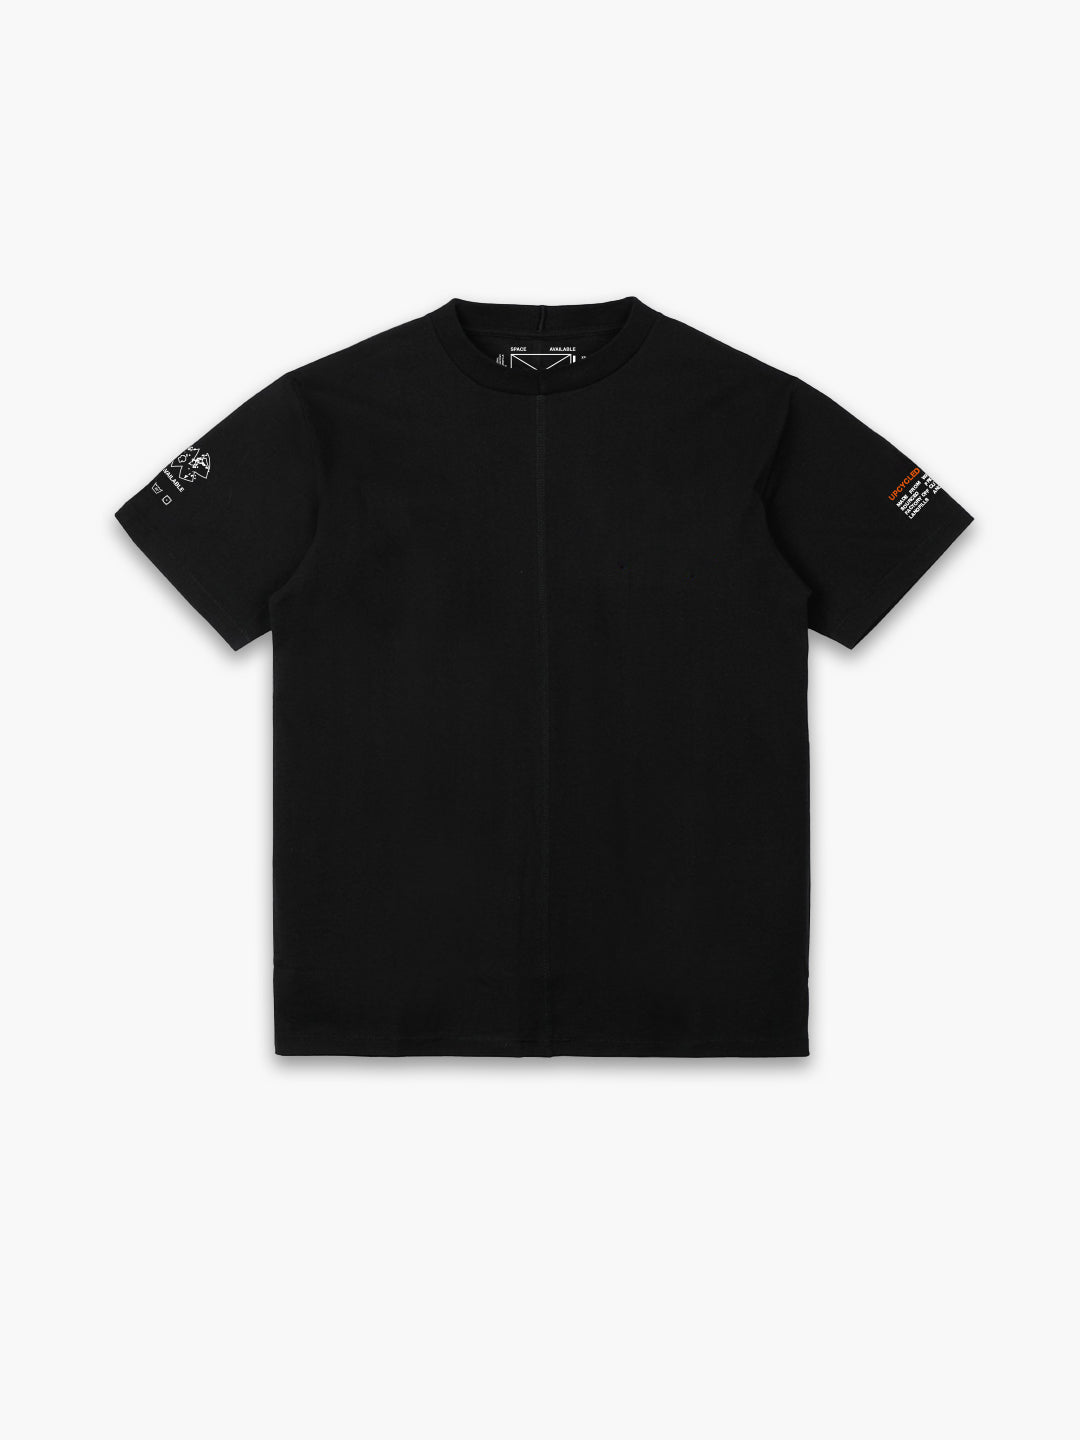 Upcycled Expansion T-shirt Black – Space Available Studio